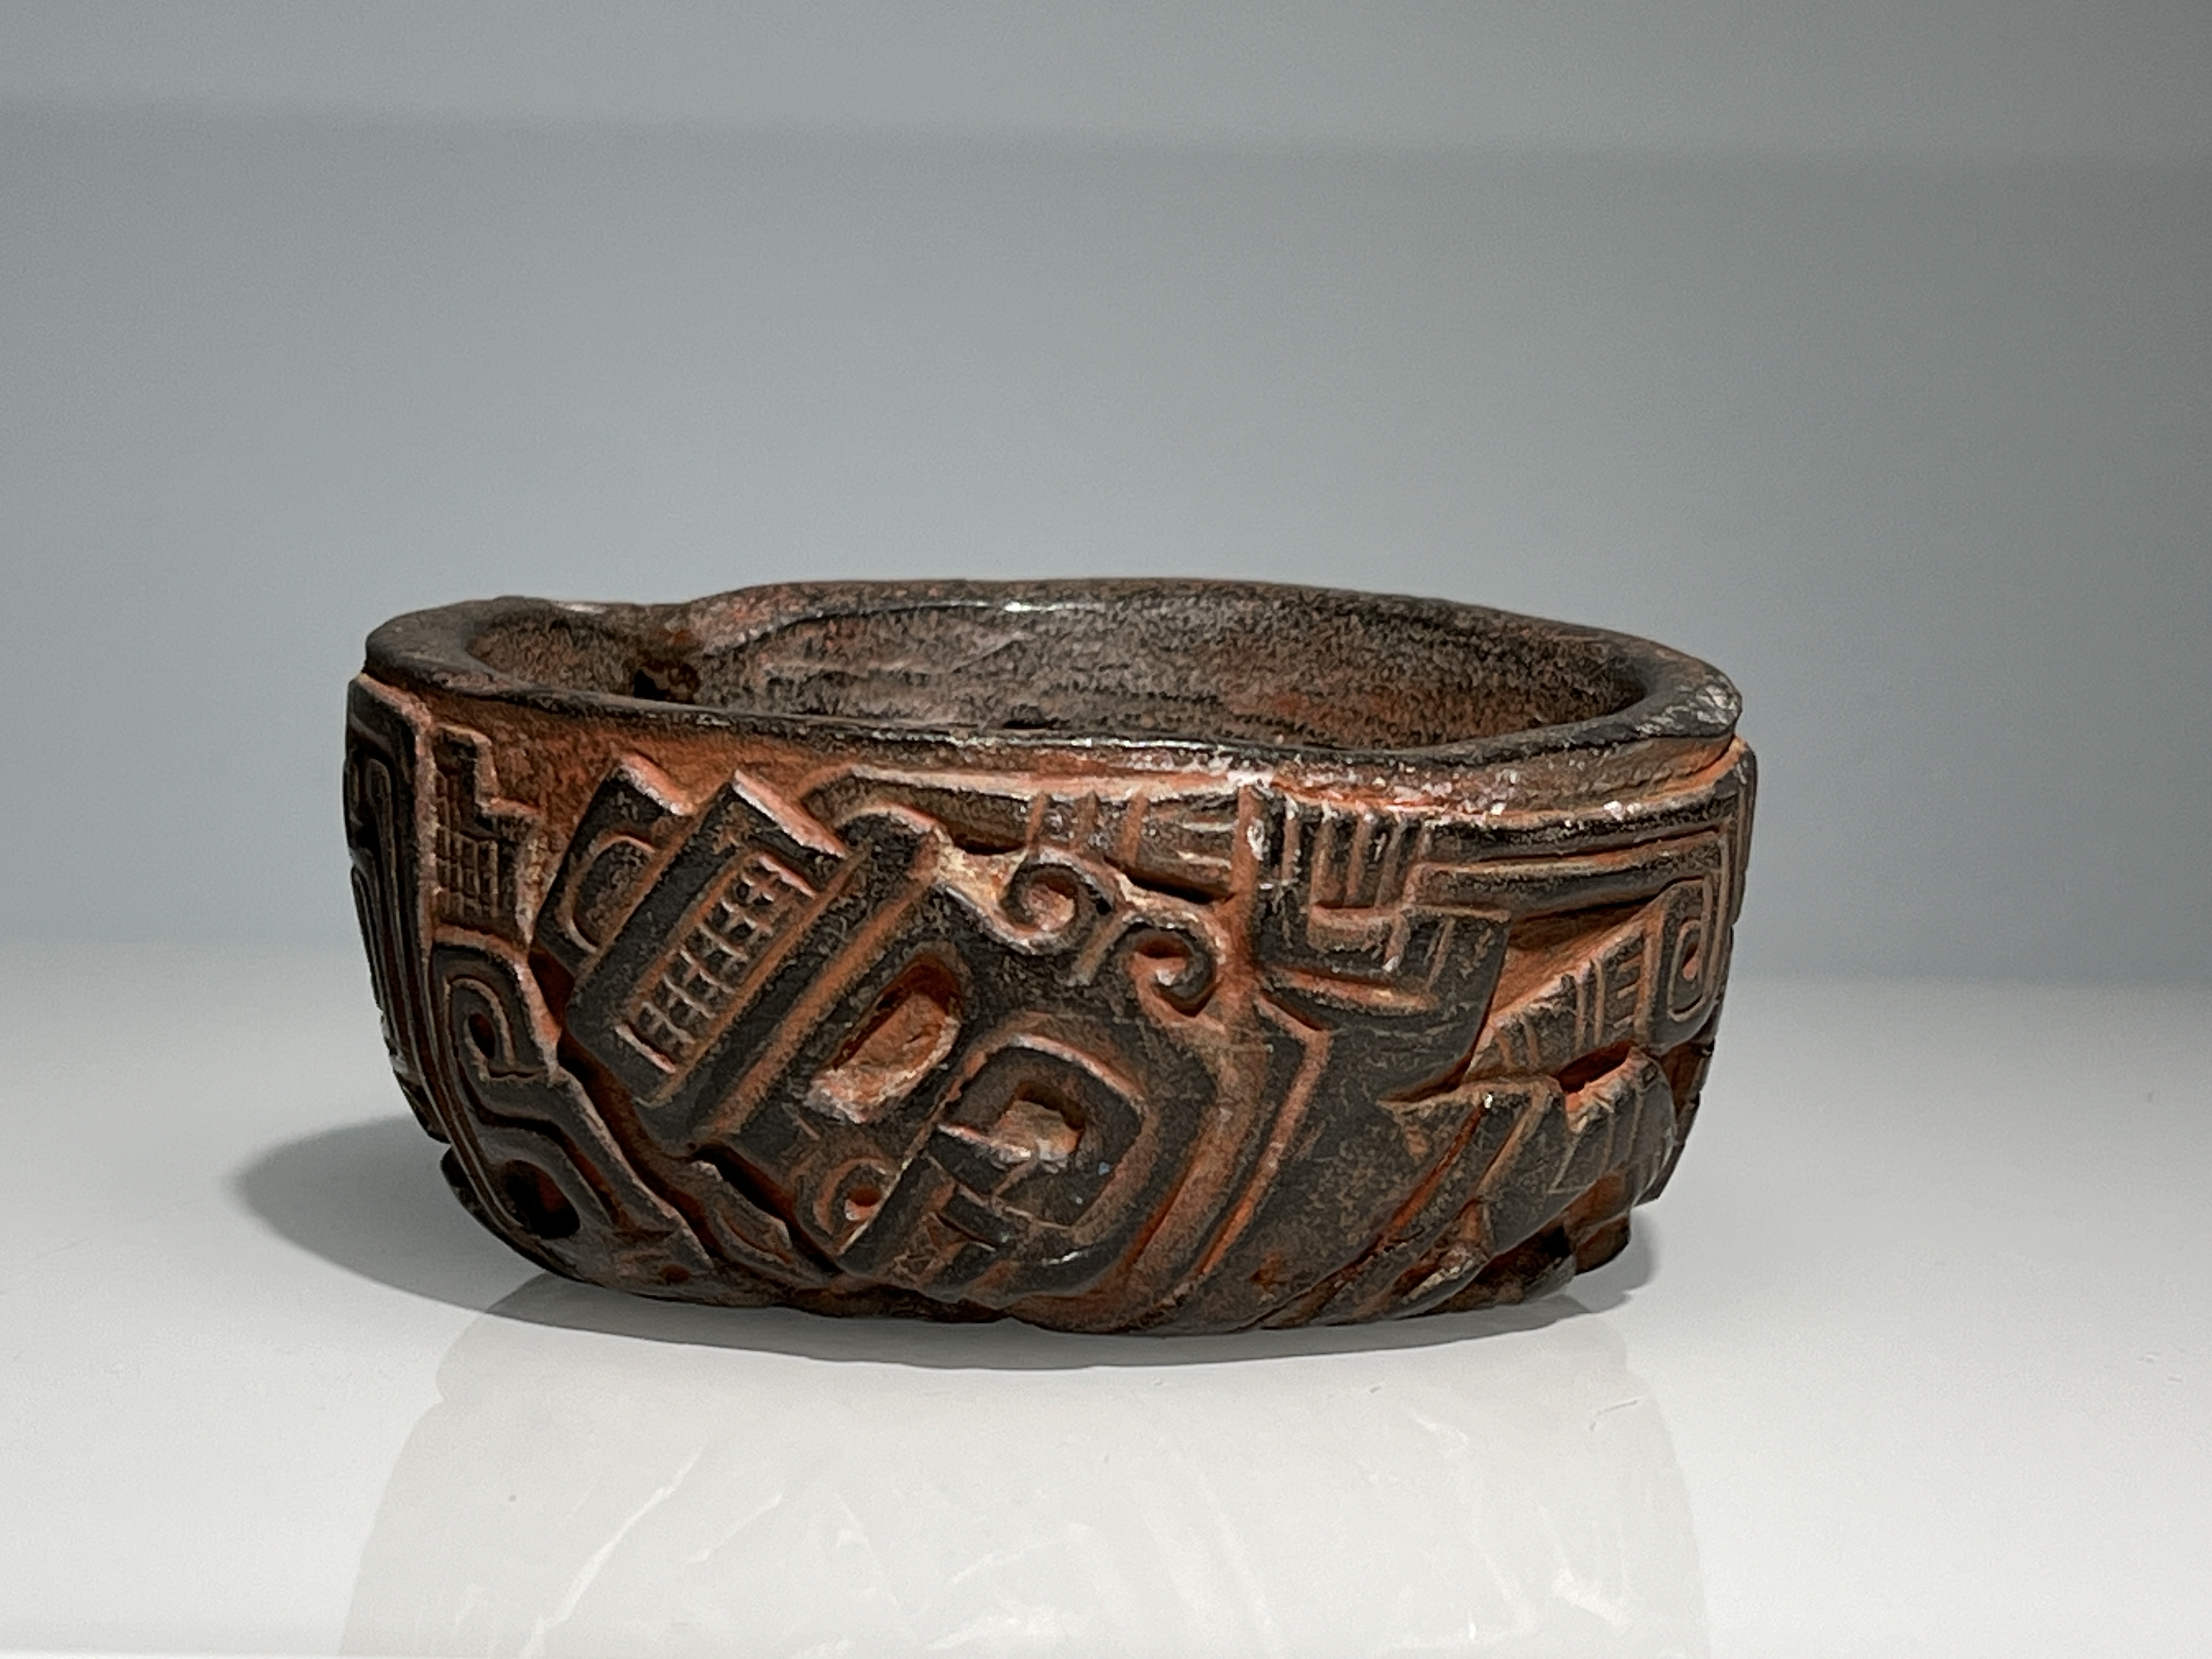 A Chavin Culture Stone Vessel with Mythical Figures. Peru ca. 900-250 BC.The carved and polished